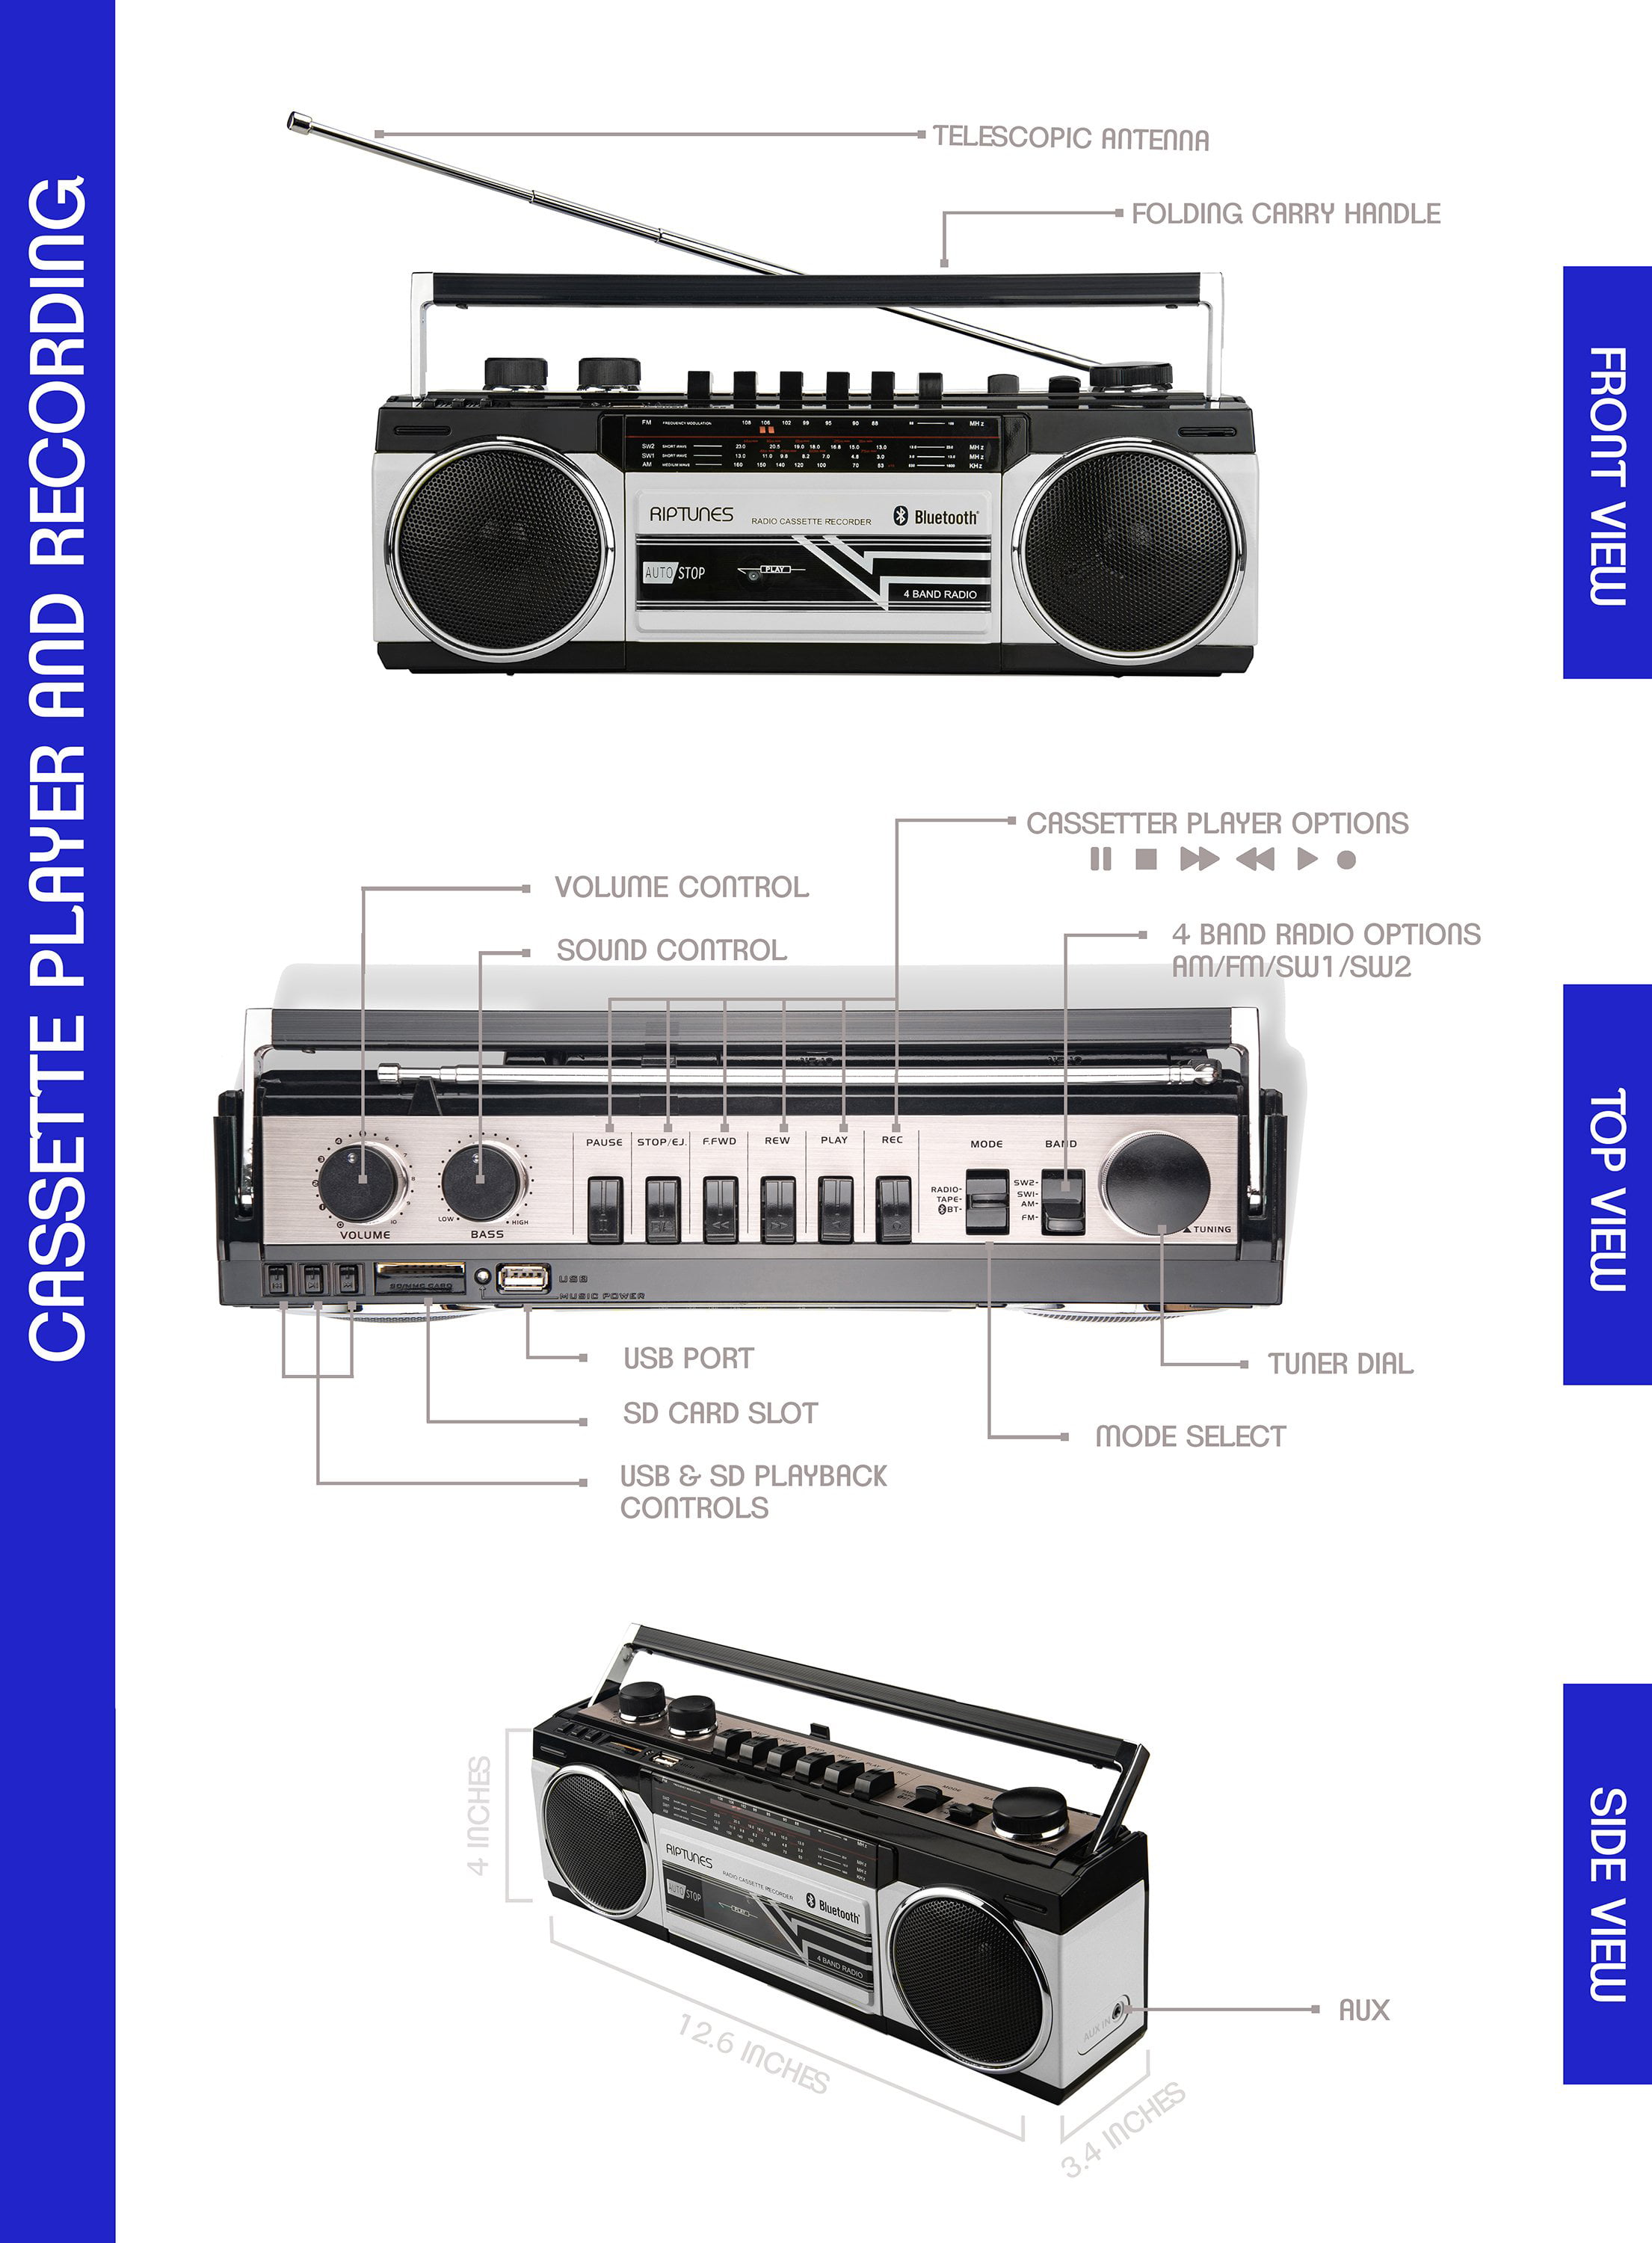 Riptunes Retro Boombox Cassette Recorder, Blueooth Radio Player with Radio and Band AM/FM/SW1/SW2